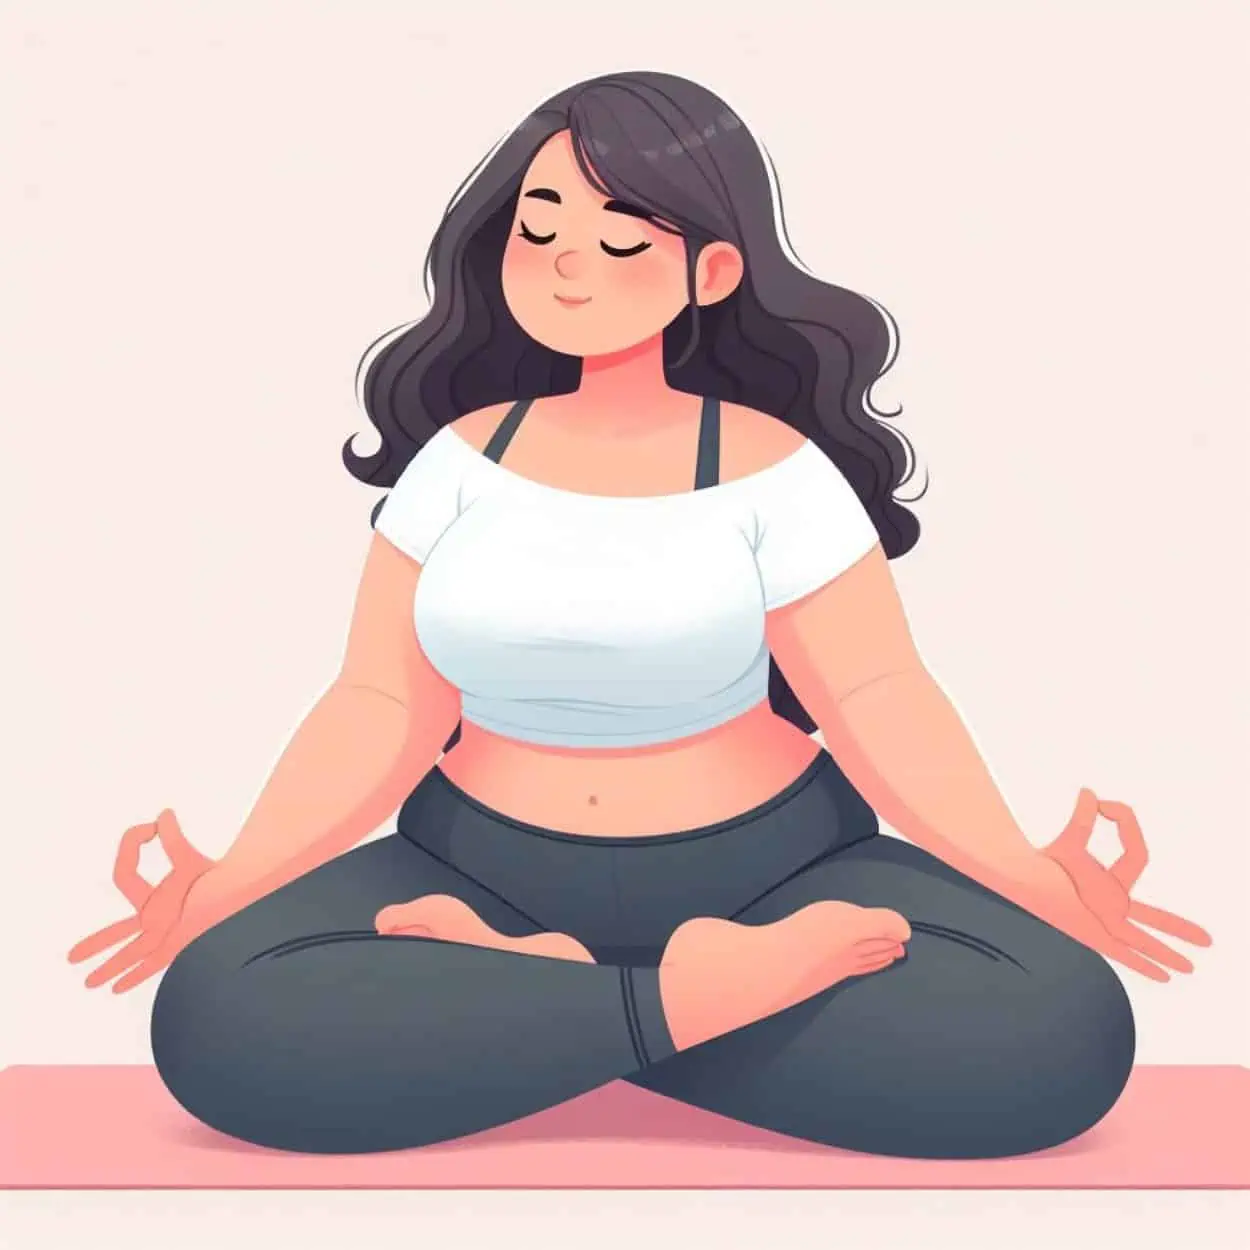 In this image a fat girl is practicing yoga mudra to lose weight